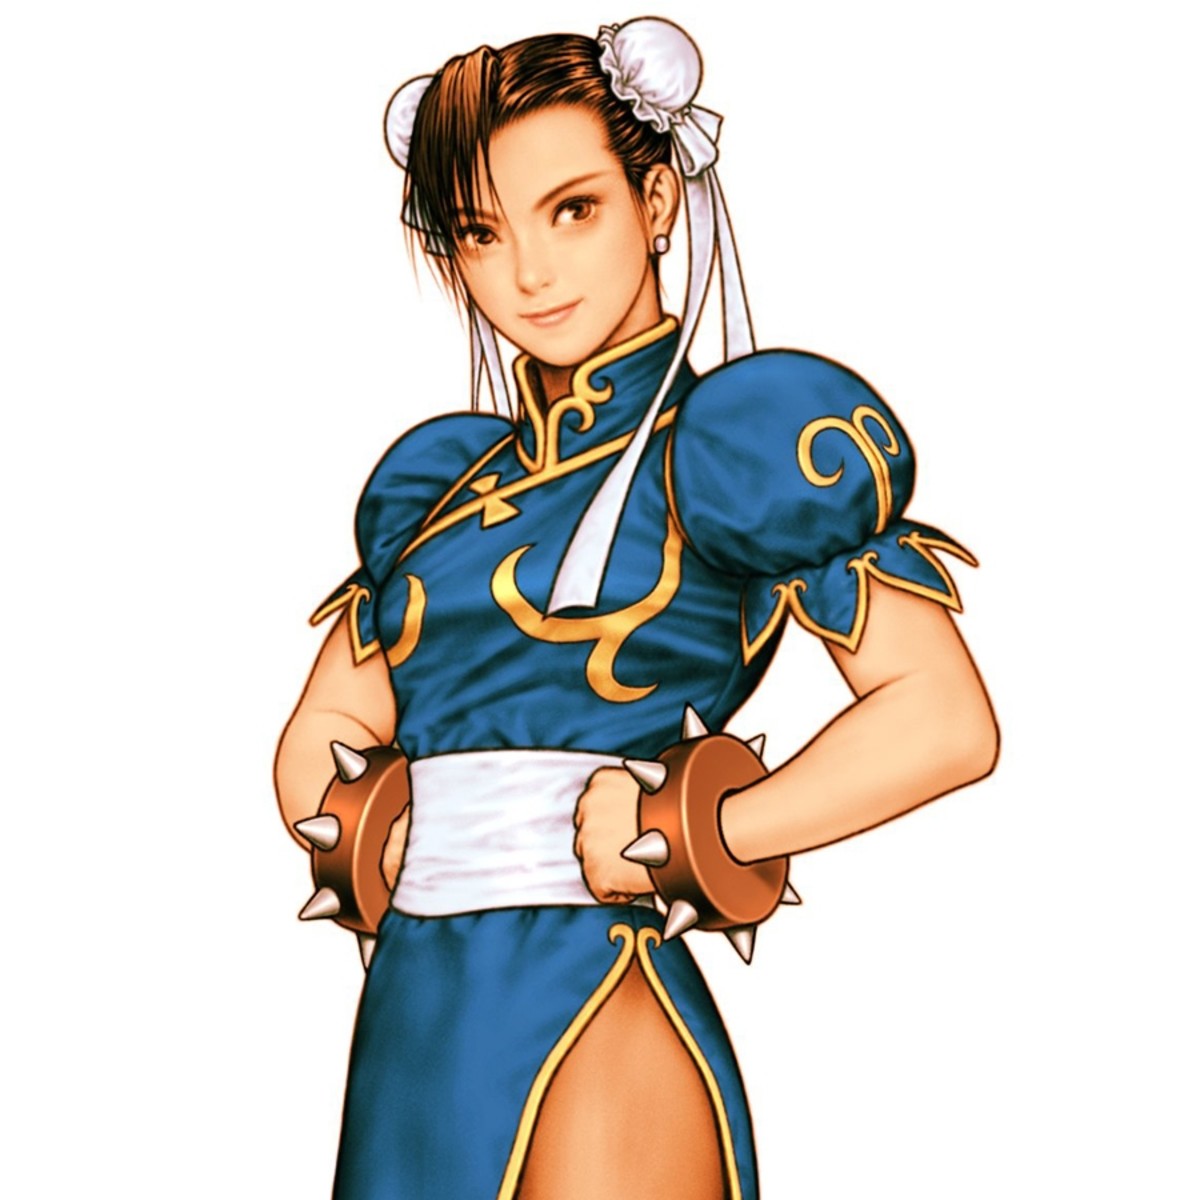 The Best Female Fighters In The History of Video Games - Street